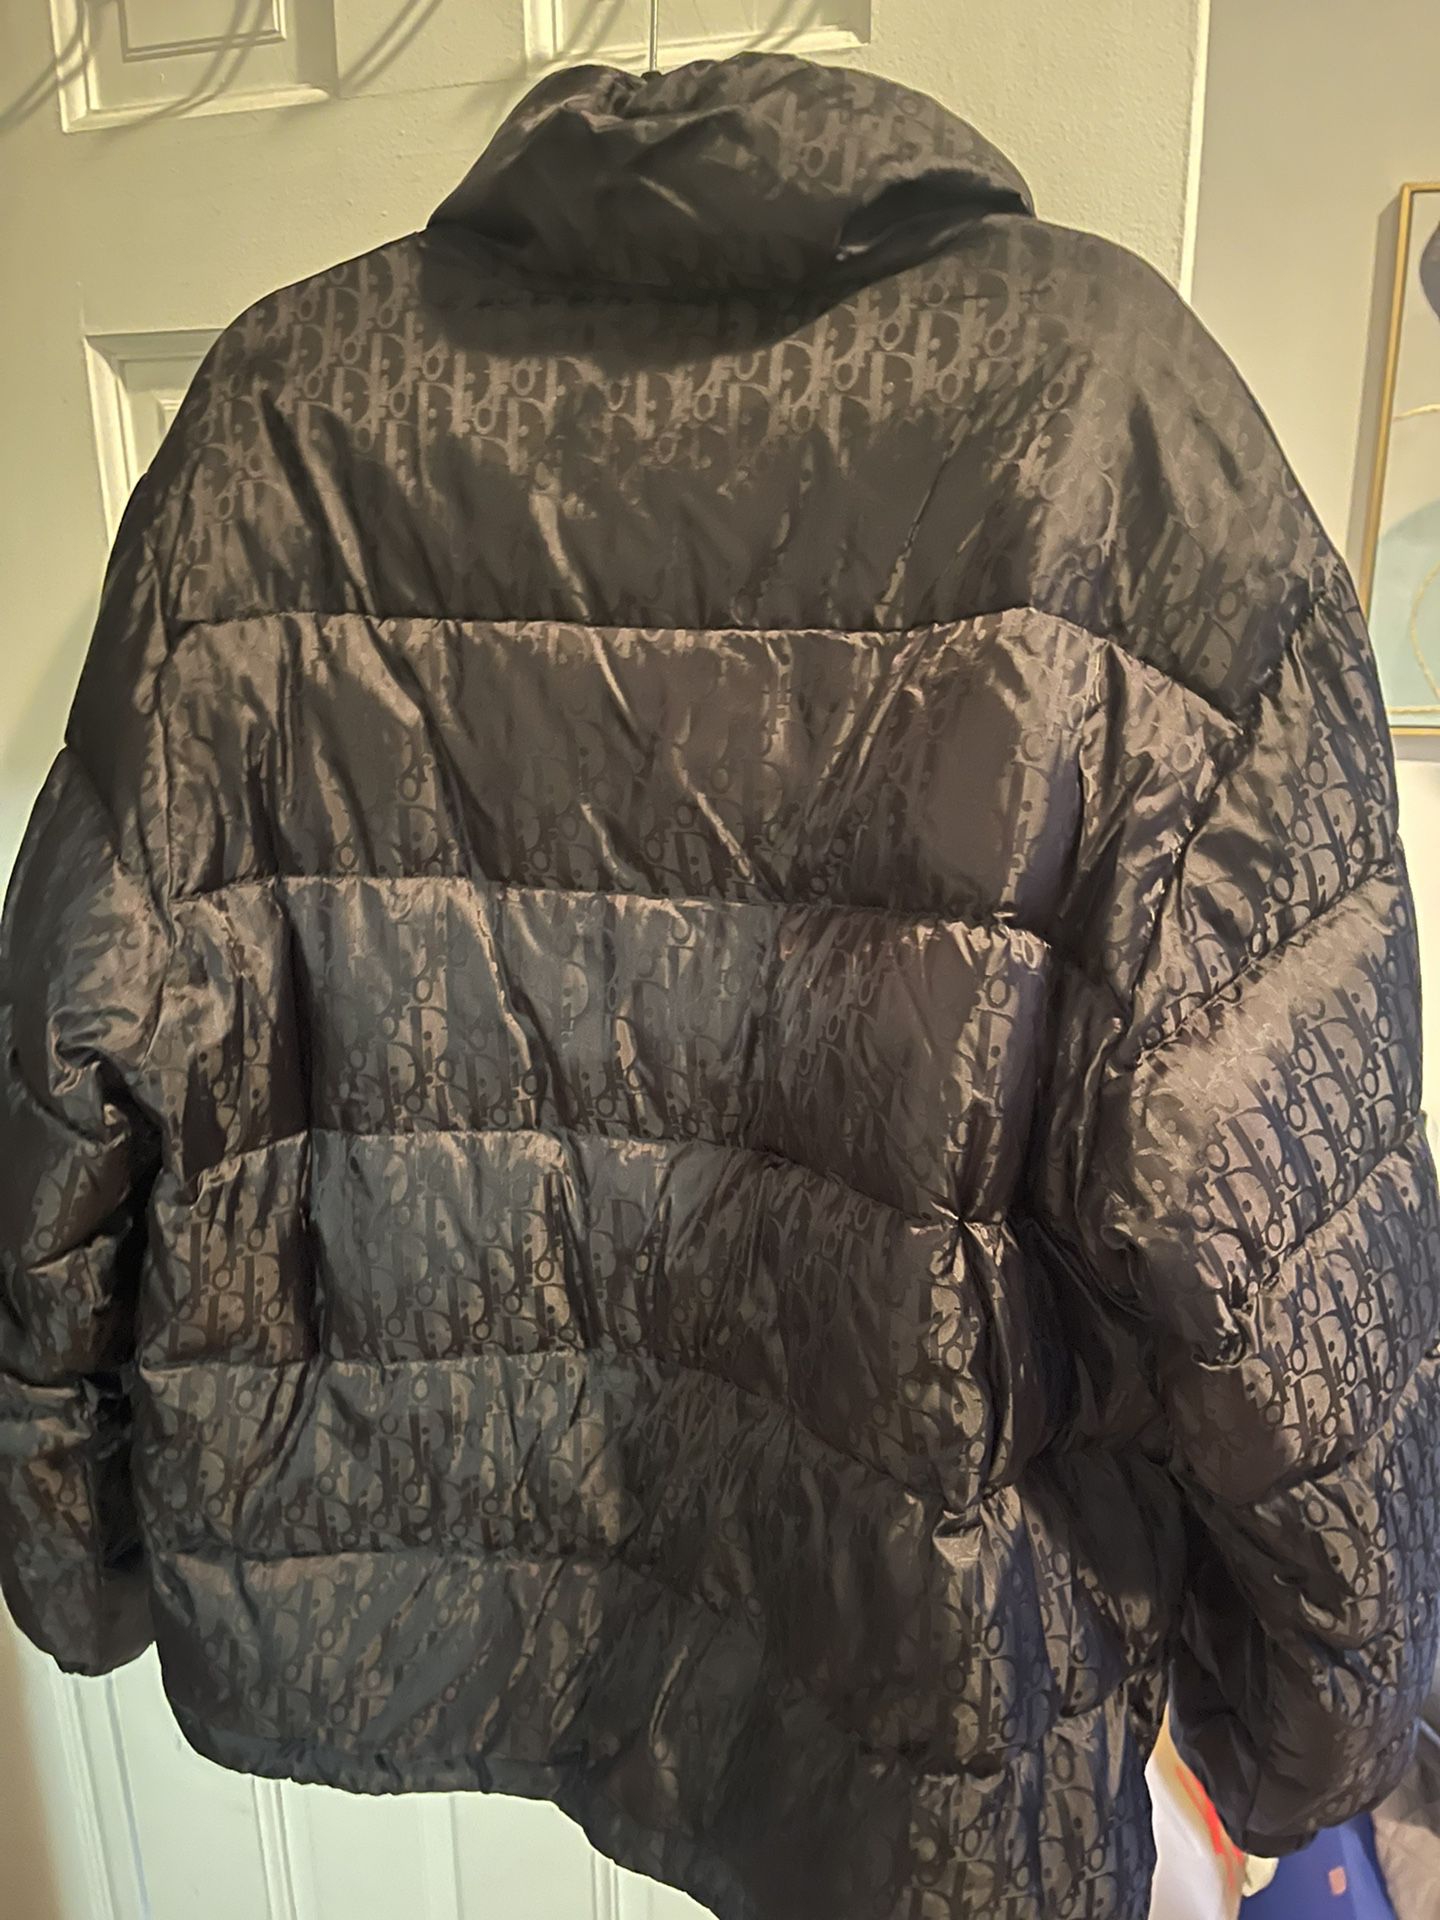 Dior Puffer Jacket for Sale in New York, NY - OfferUp